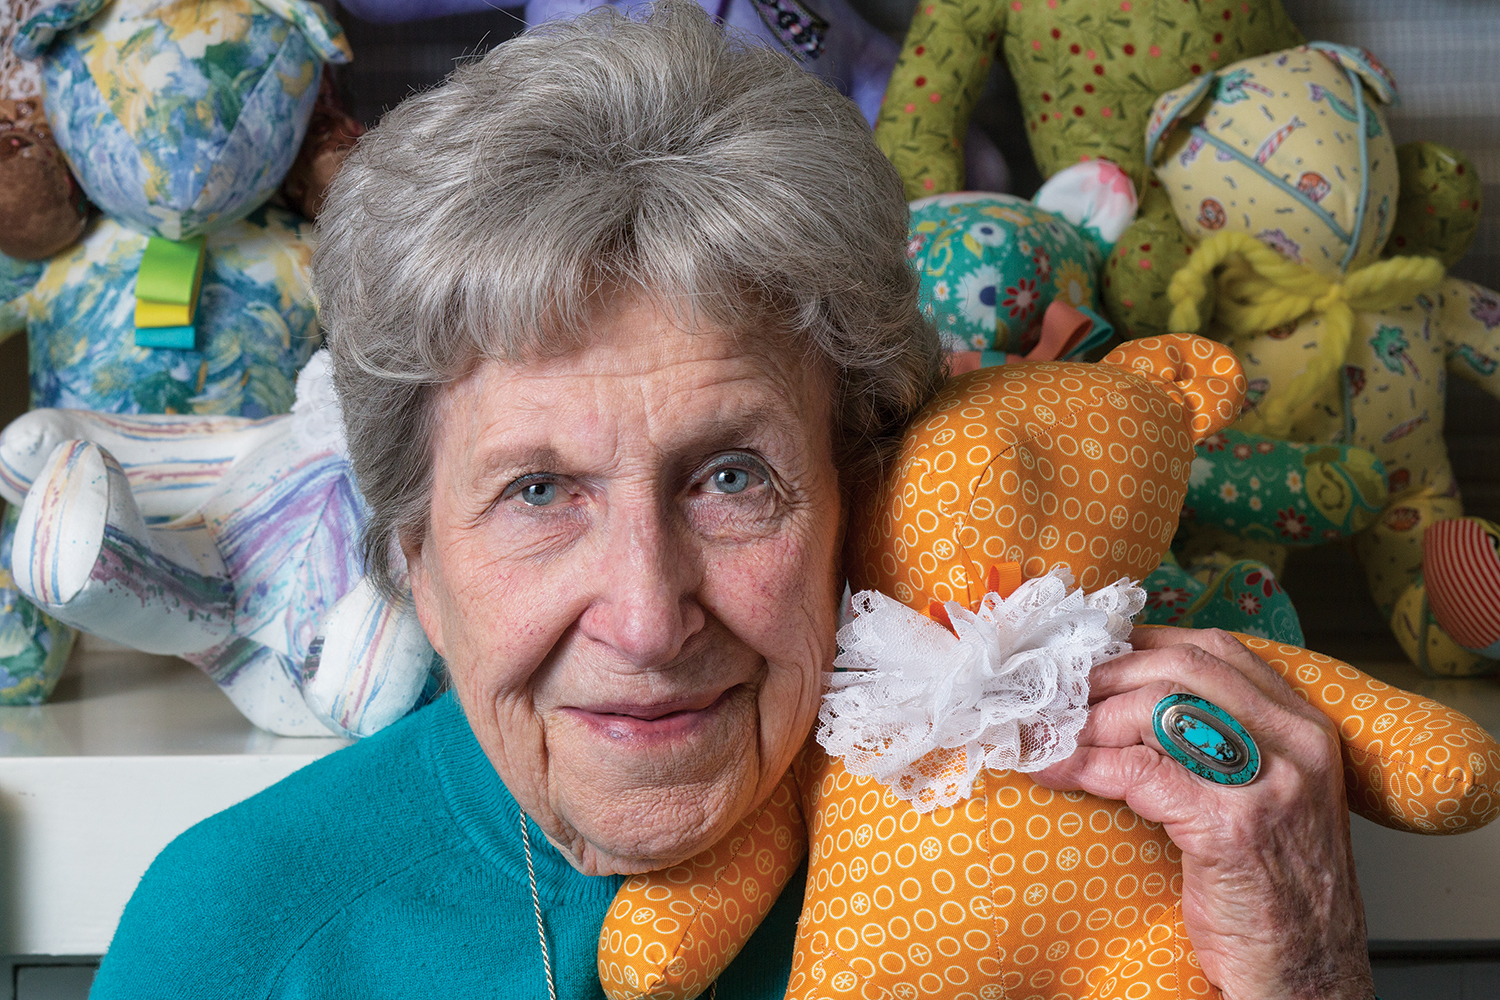 Ruth Brasher holding one of her home made teddy bears. There are other bears in the background.